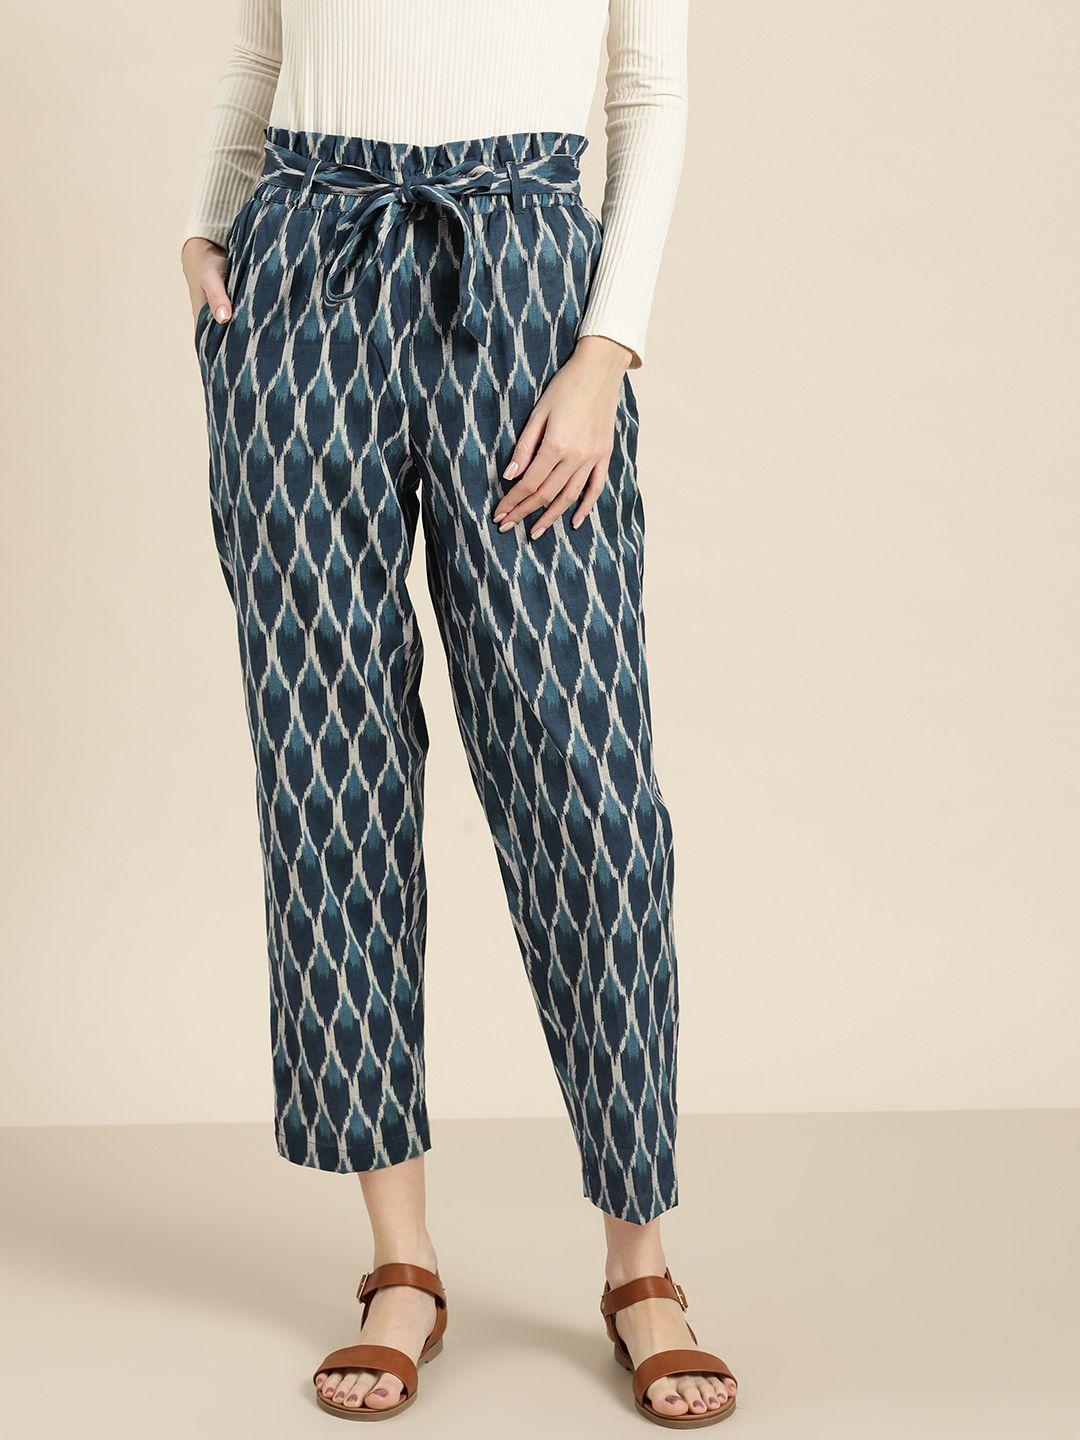 shae by sassafras women navy blue & off-white ikat printed cropped trousers